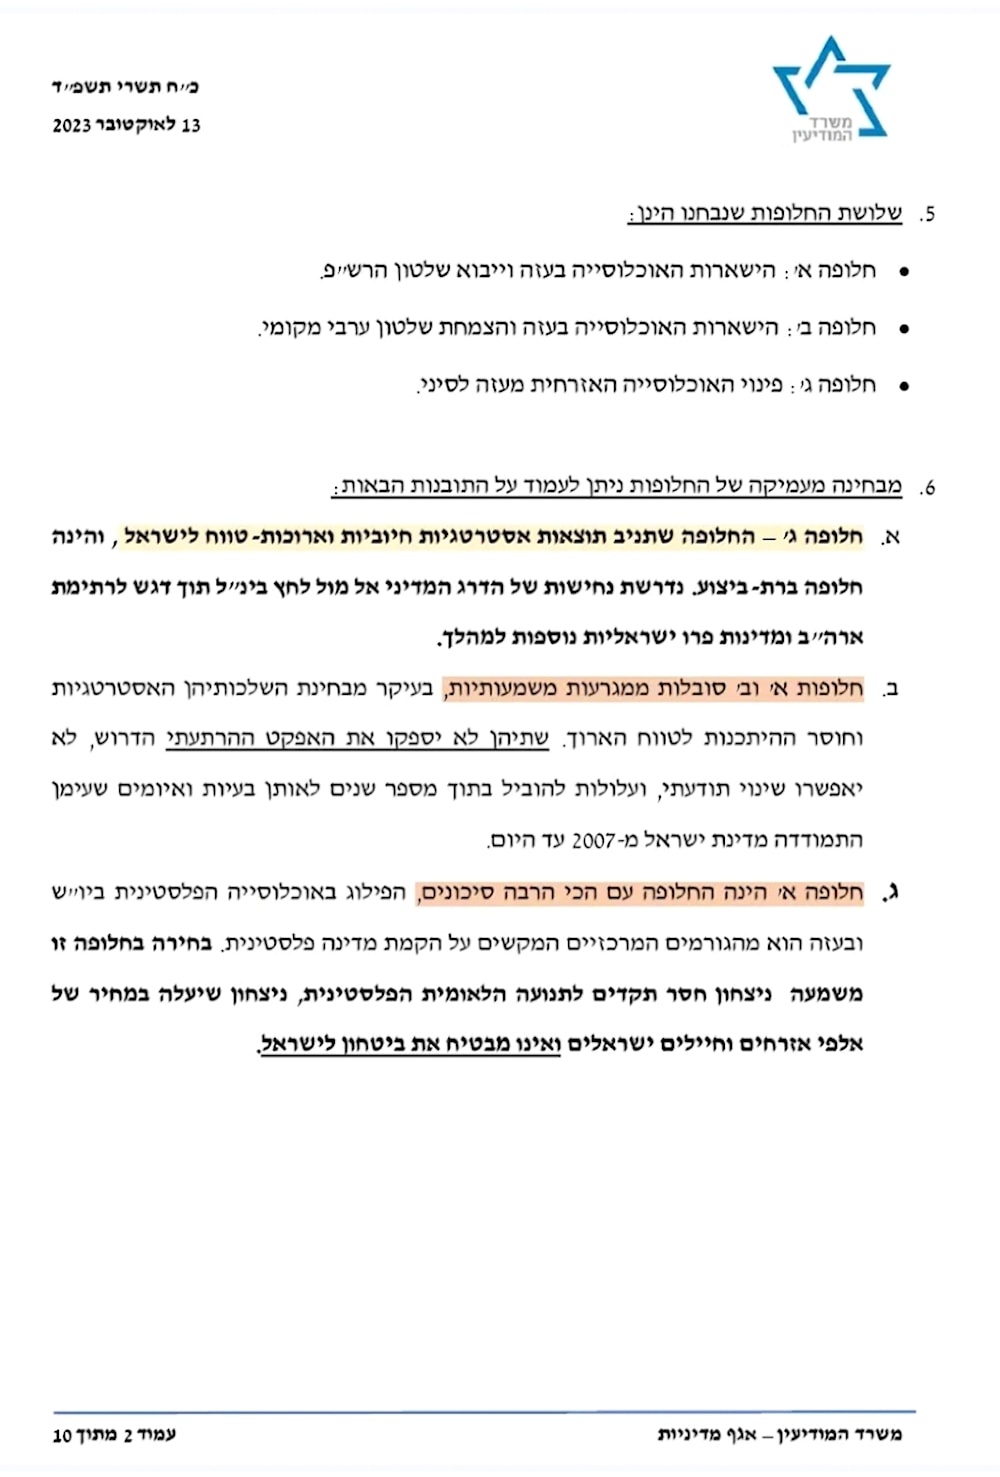 Leaked document from the Israeli Ministry of Intelligence says that Israel is trying to push Gazans into Sinai